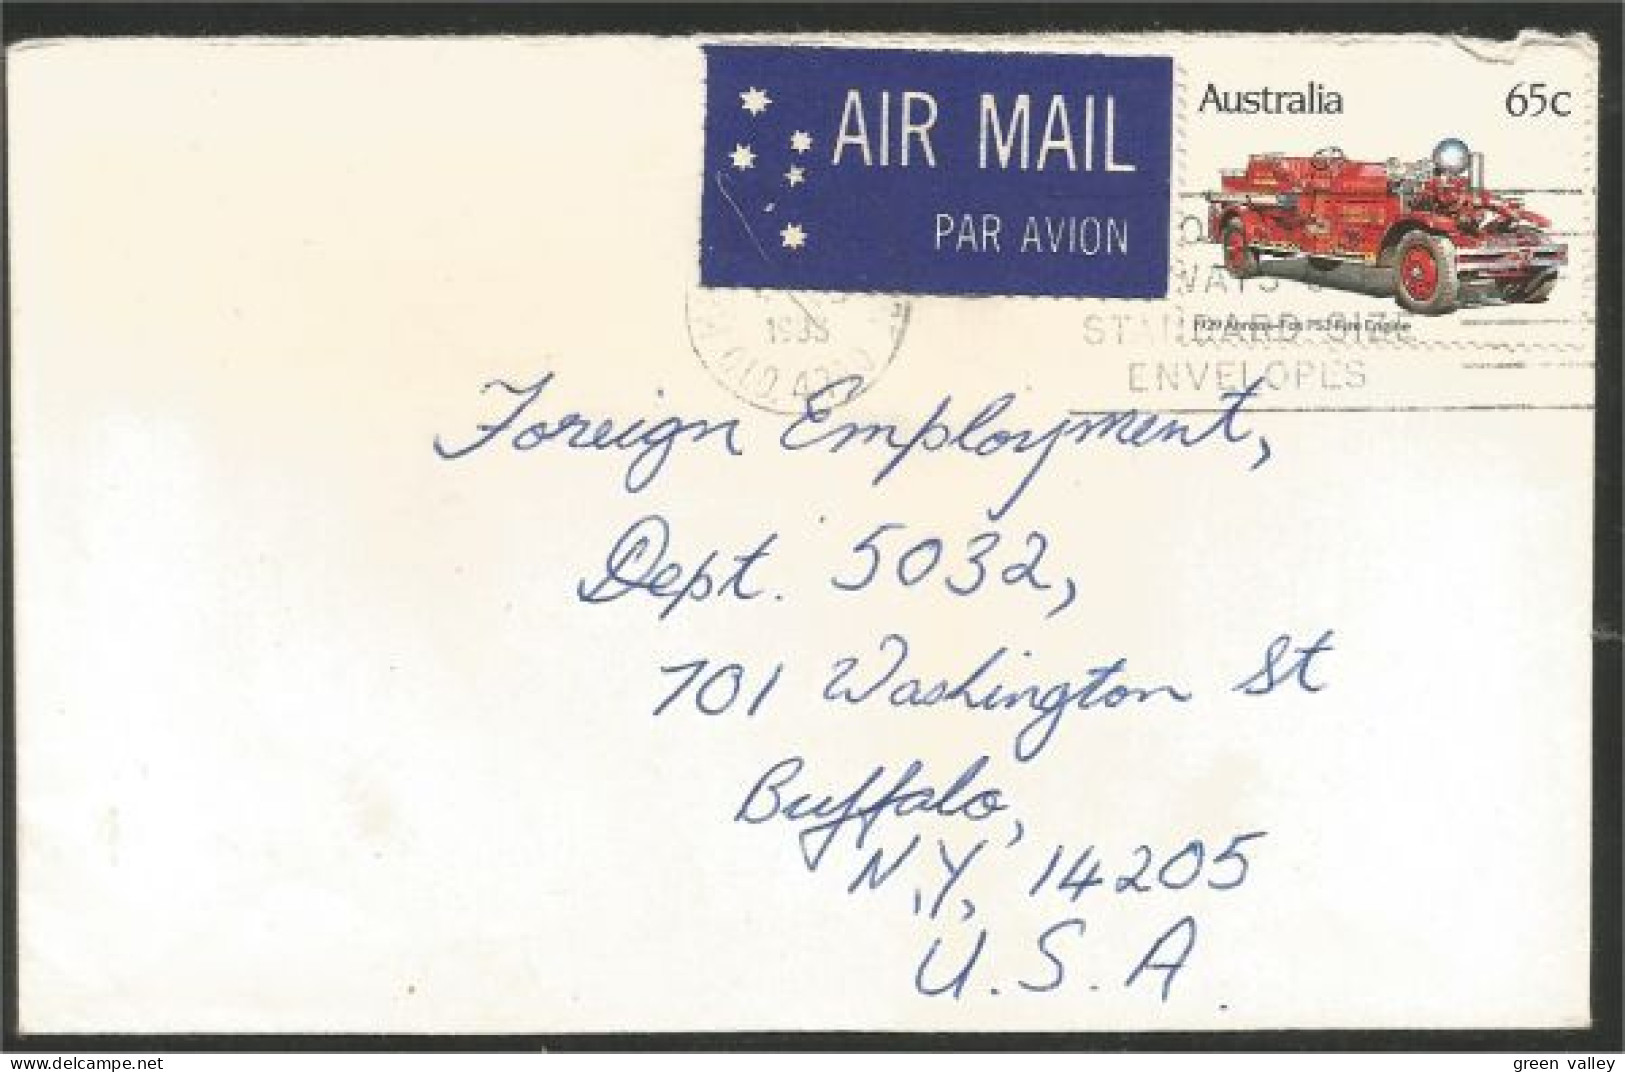 Australia Ahrens-Fox Fire Engine 1983 Cover From QLD To Buffalo N.Y. USA ( A91 941) - Postmark Collection